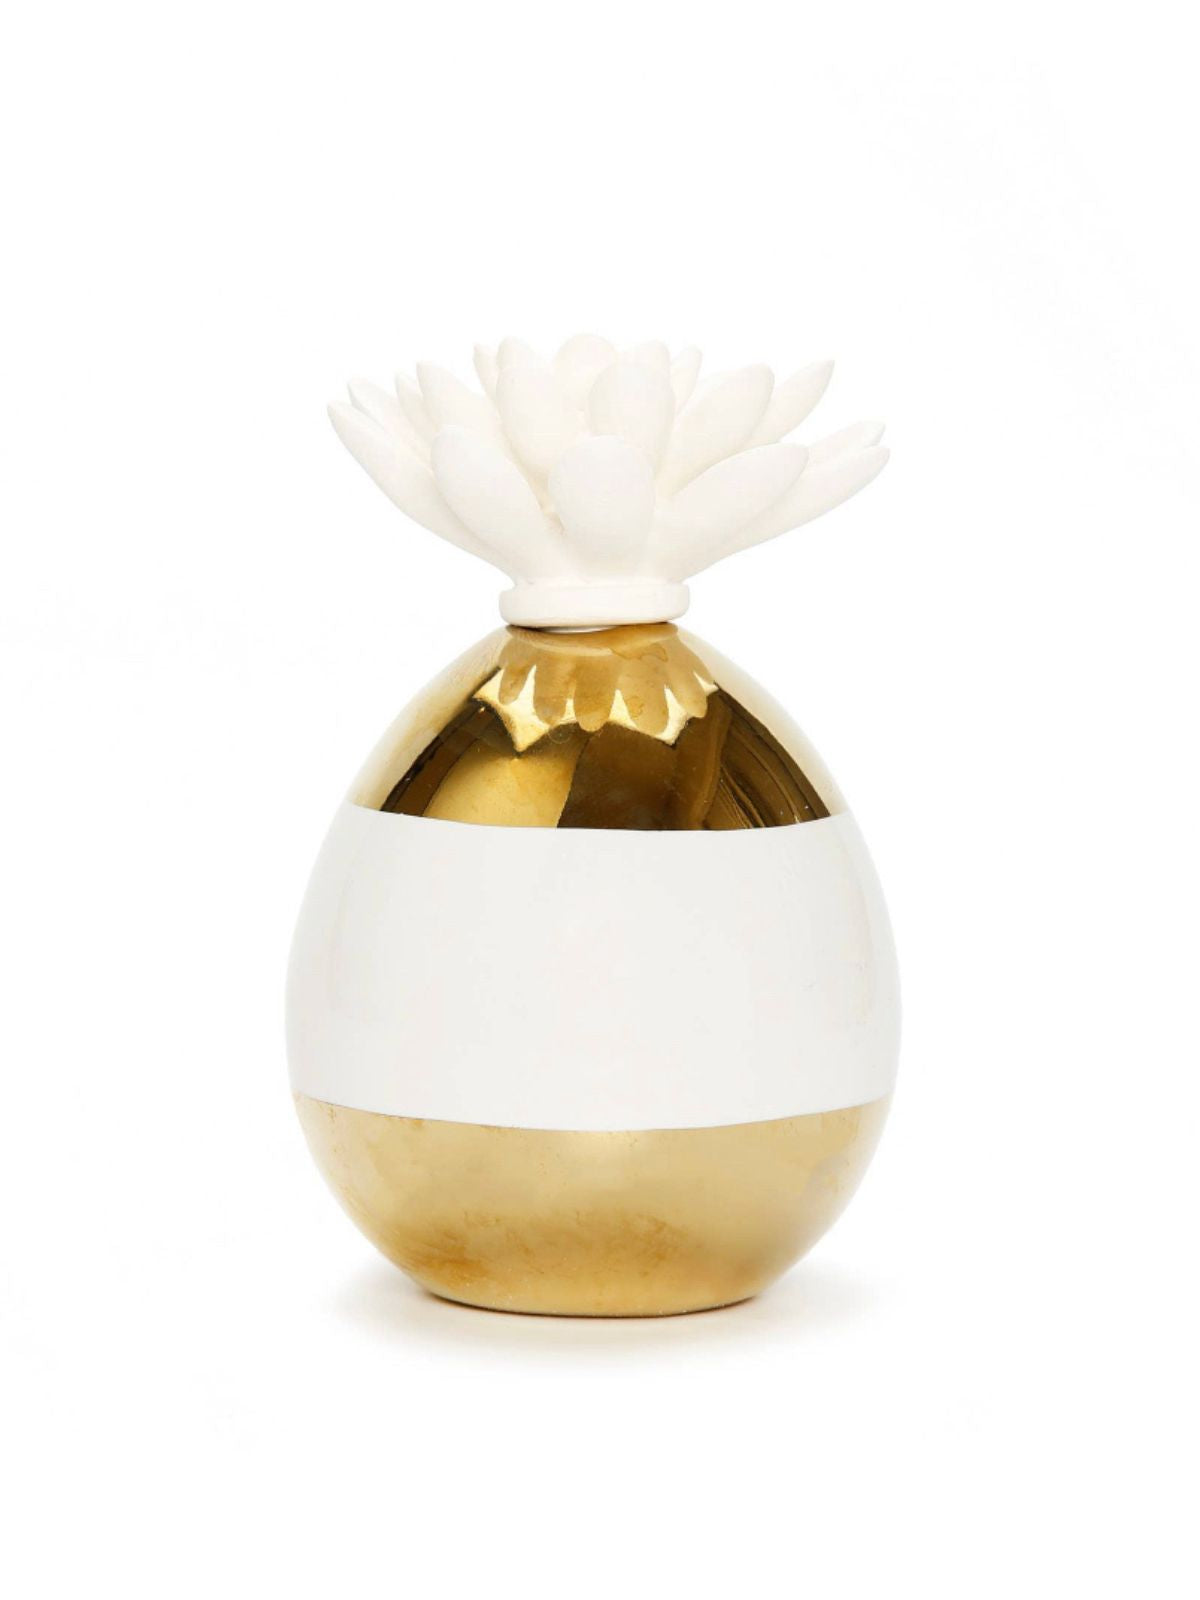 Iris and Rose Scented White and Gold Small Oil Diffuser with White Floral Topper Sold by KYA Home Decor. 